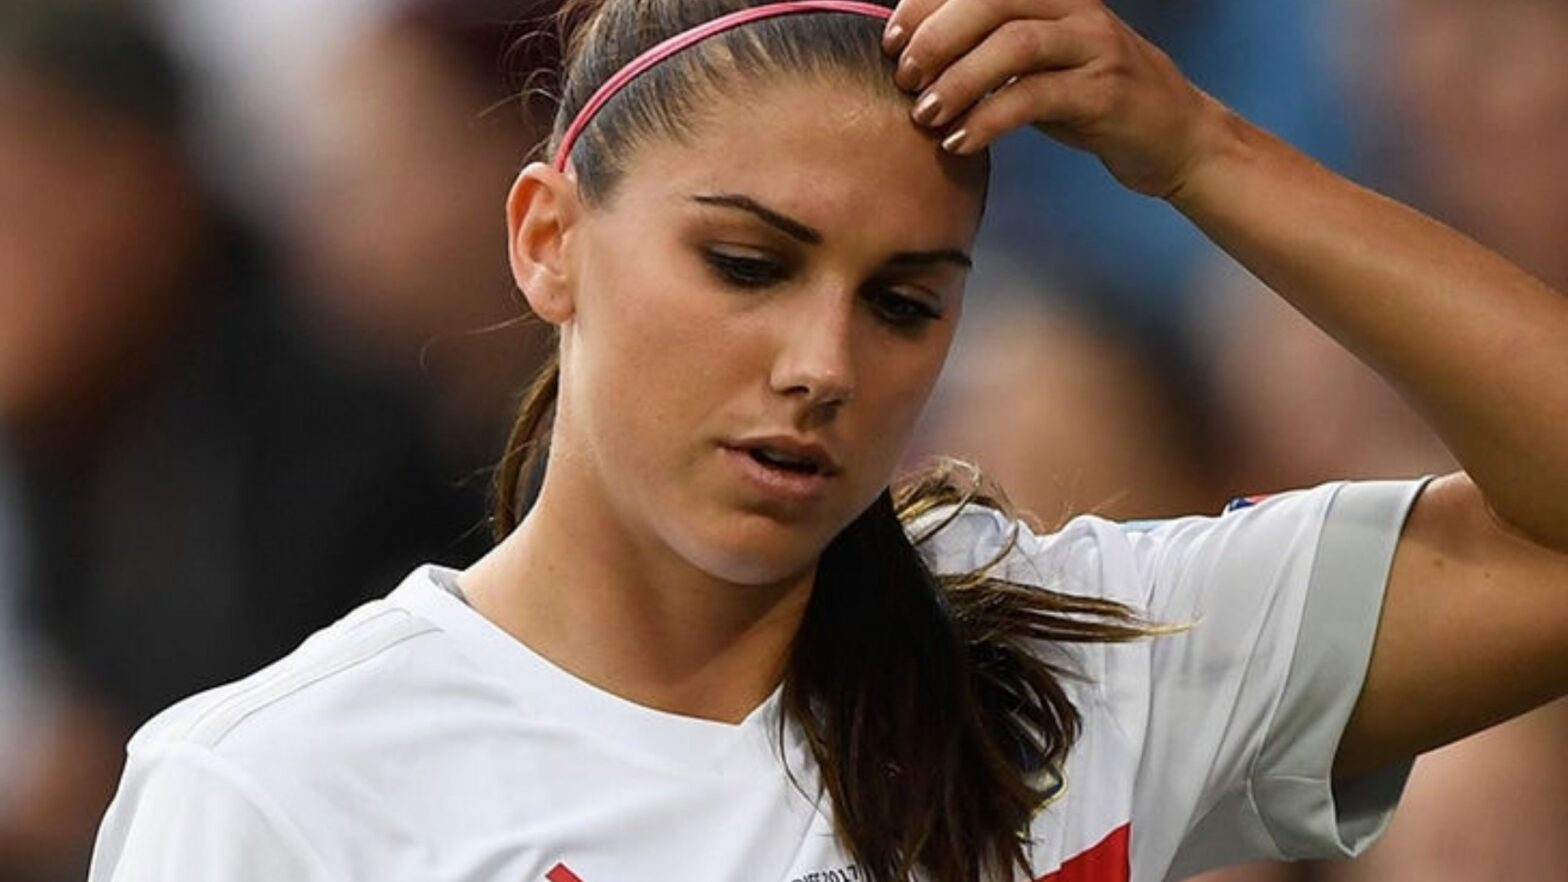 Top Most Beautiful Female Soccer Players Topbusiness Sexiezpicz Web Porn